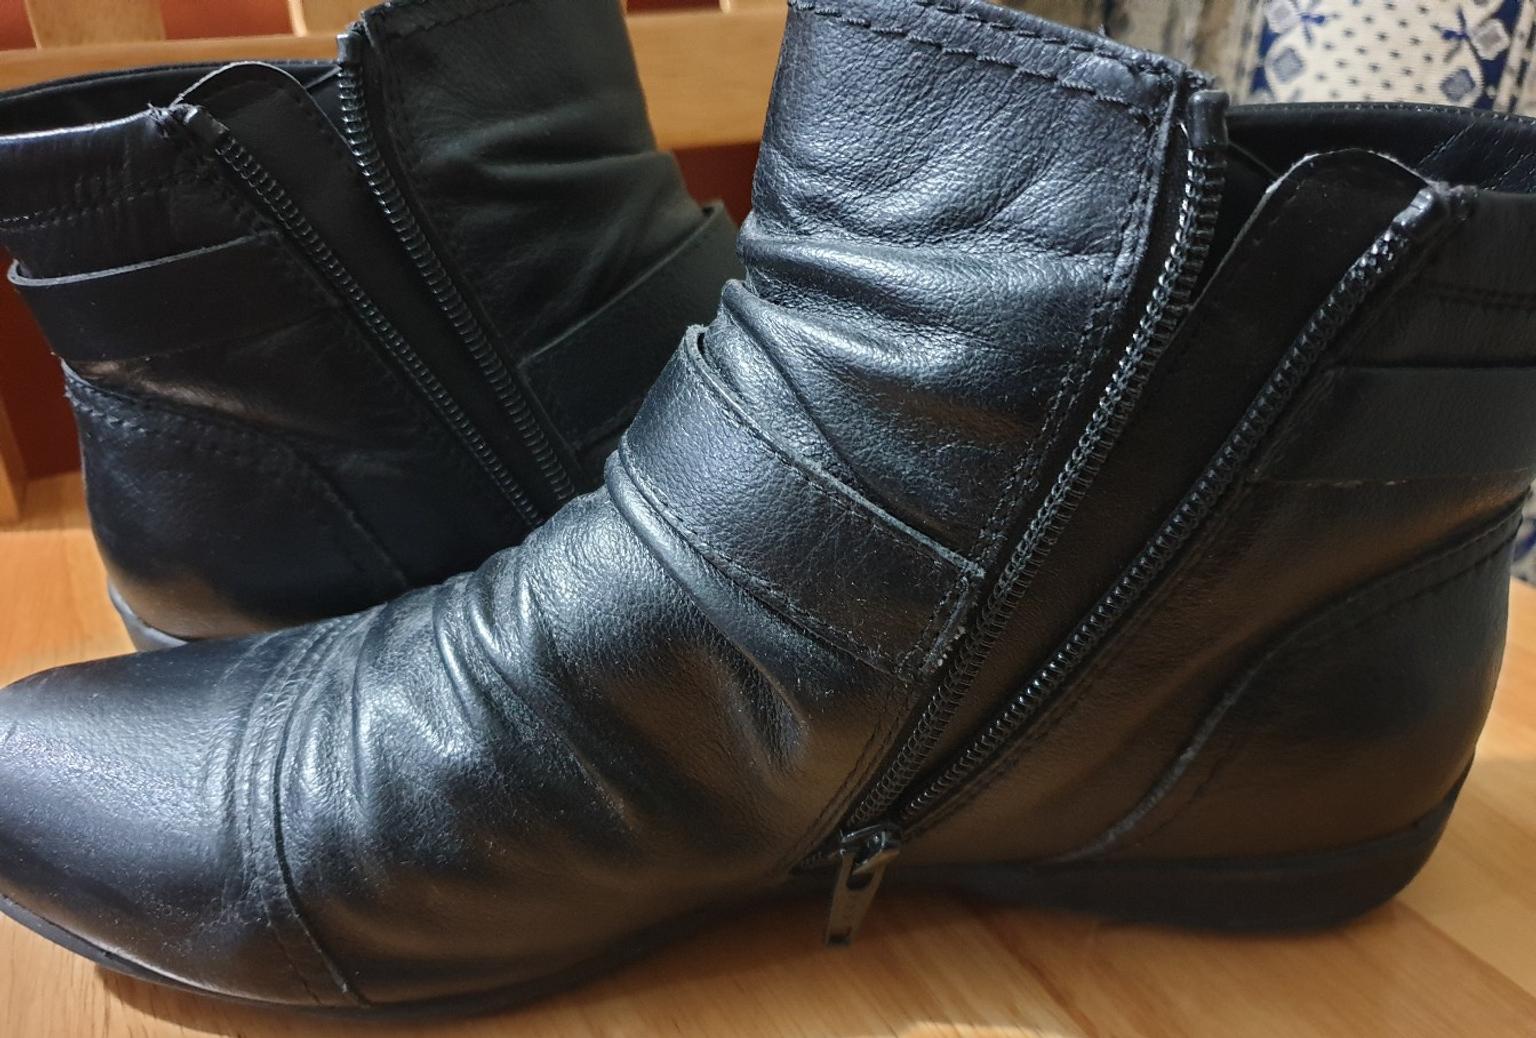 marks & spencers womens boots